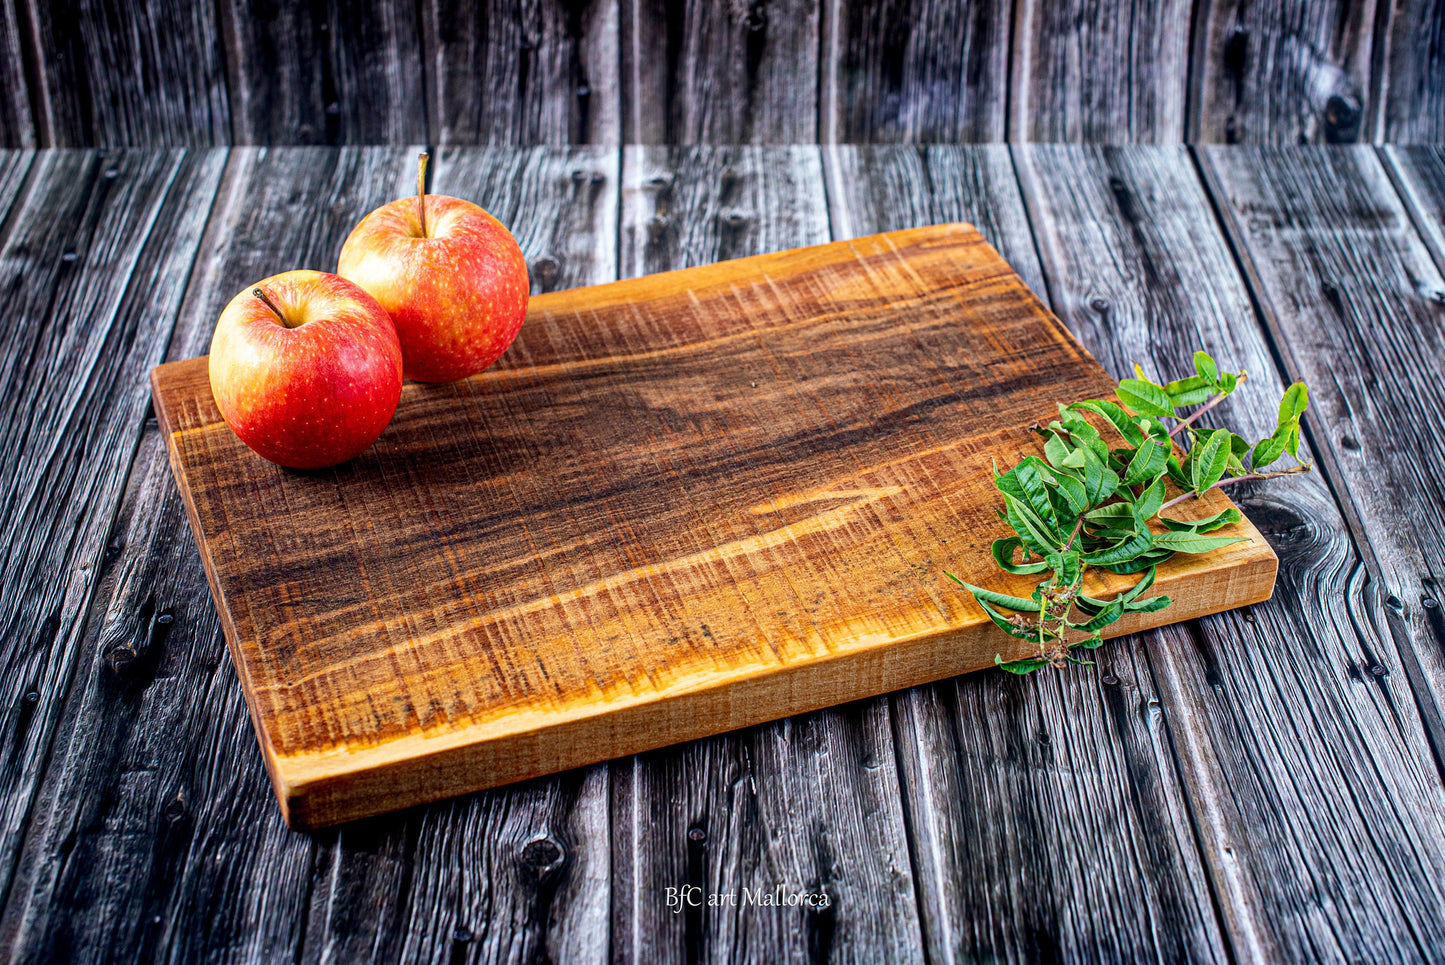 Rustic Cutting Board, Old Style Board, Strong Vintage Chopping board, Antique Chop Board, Cutting Board Olive Wood, Wood Meat Tray Cheese